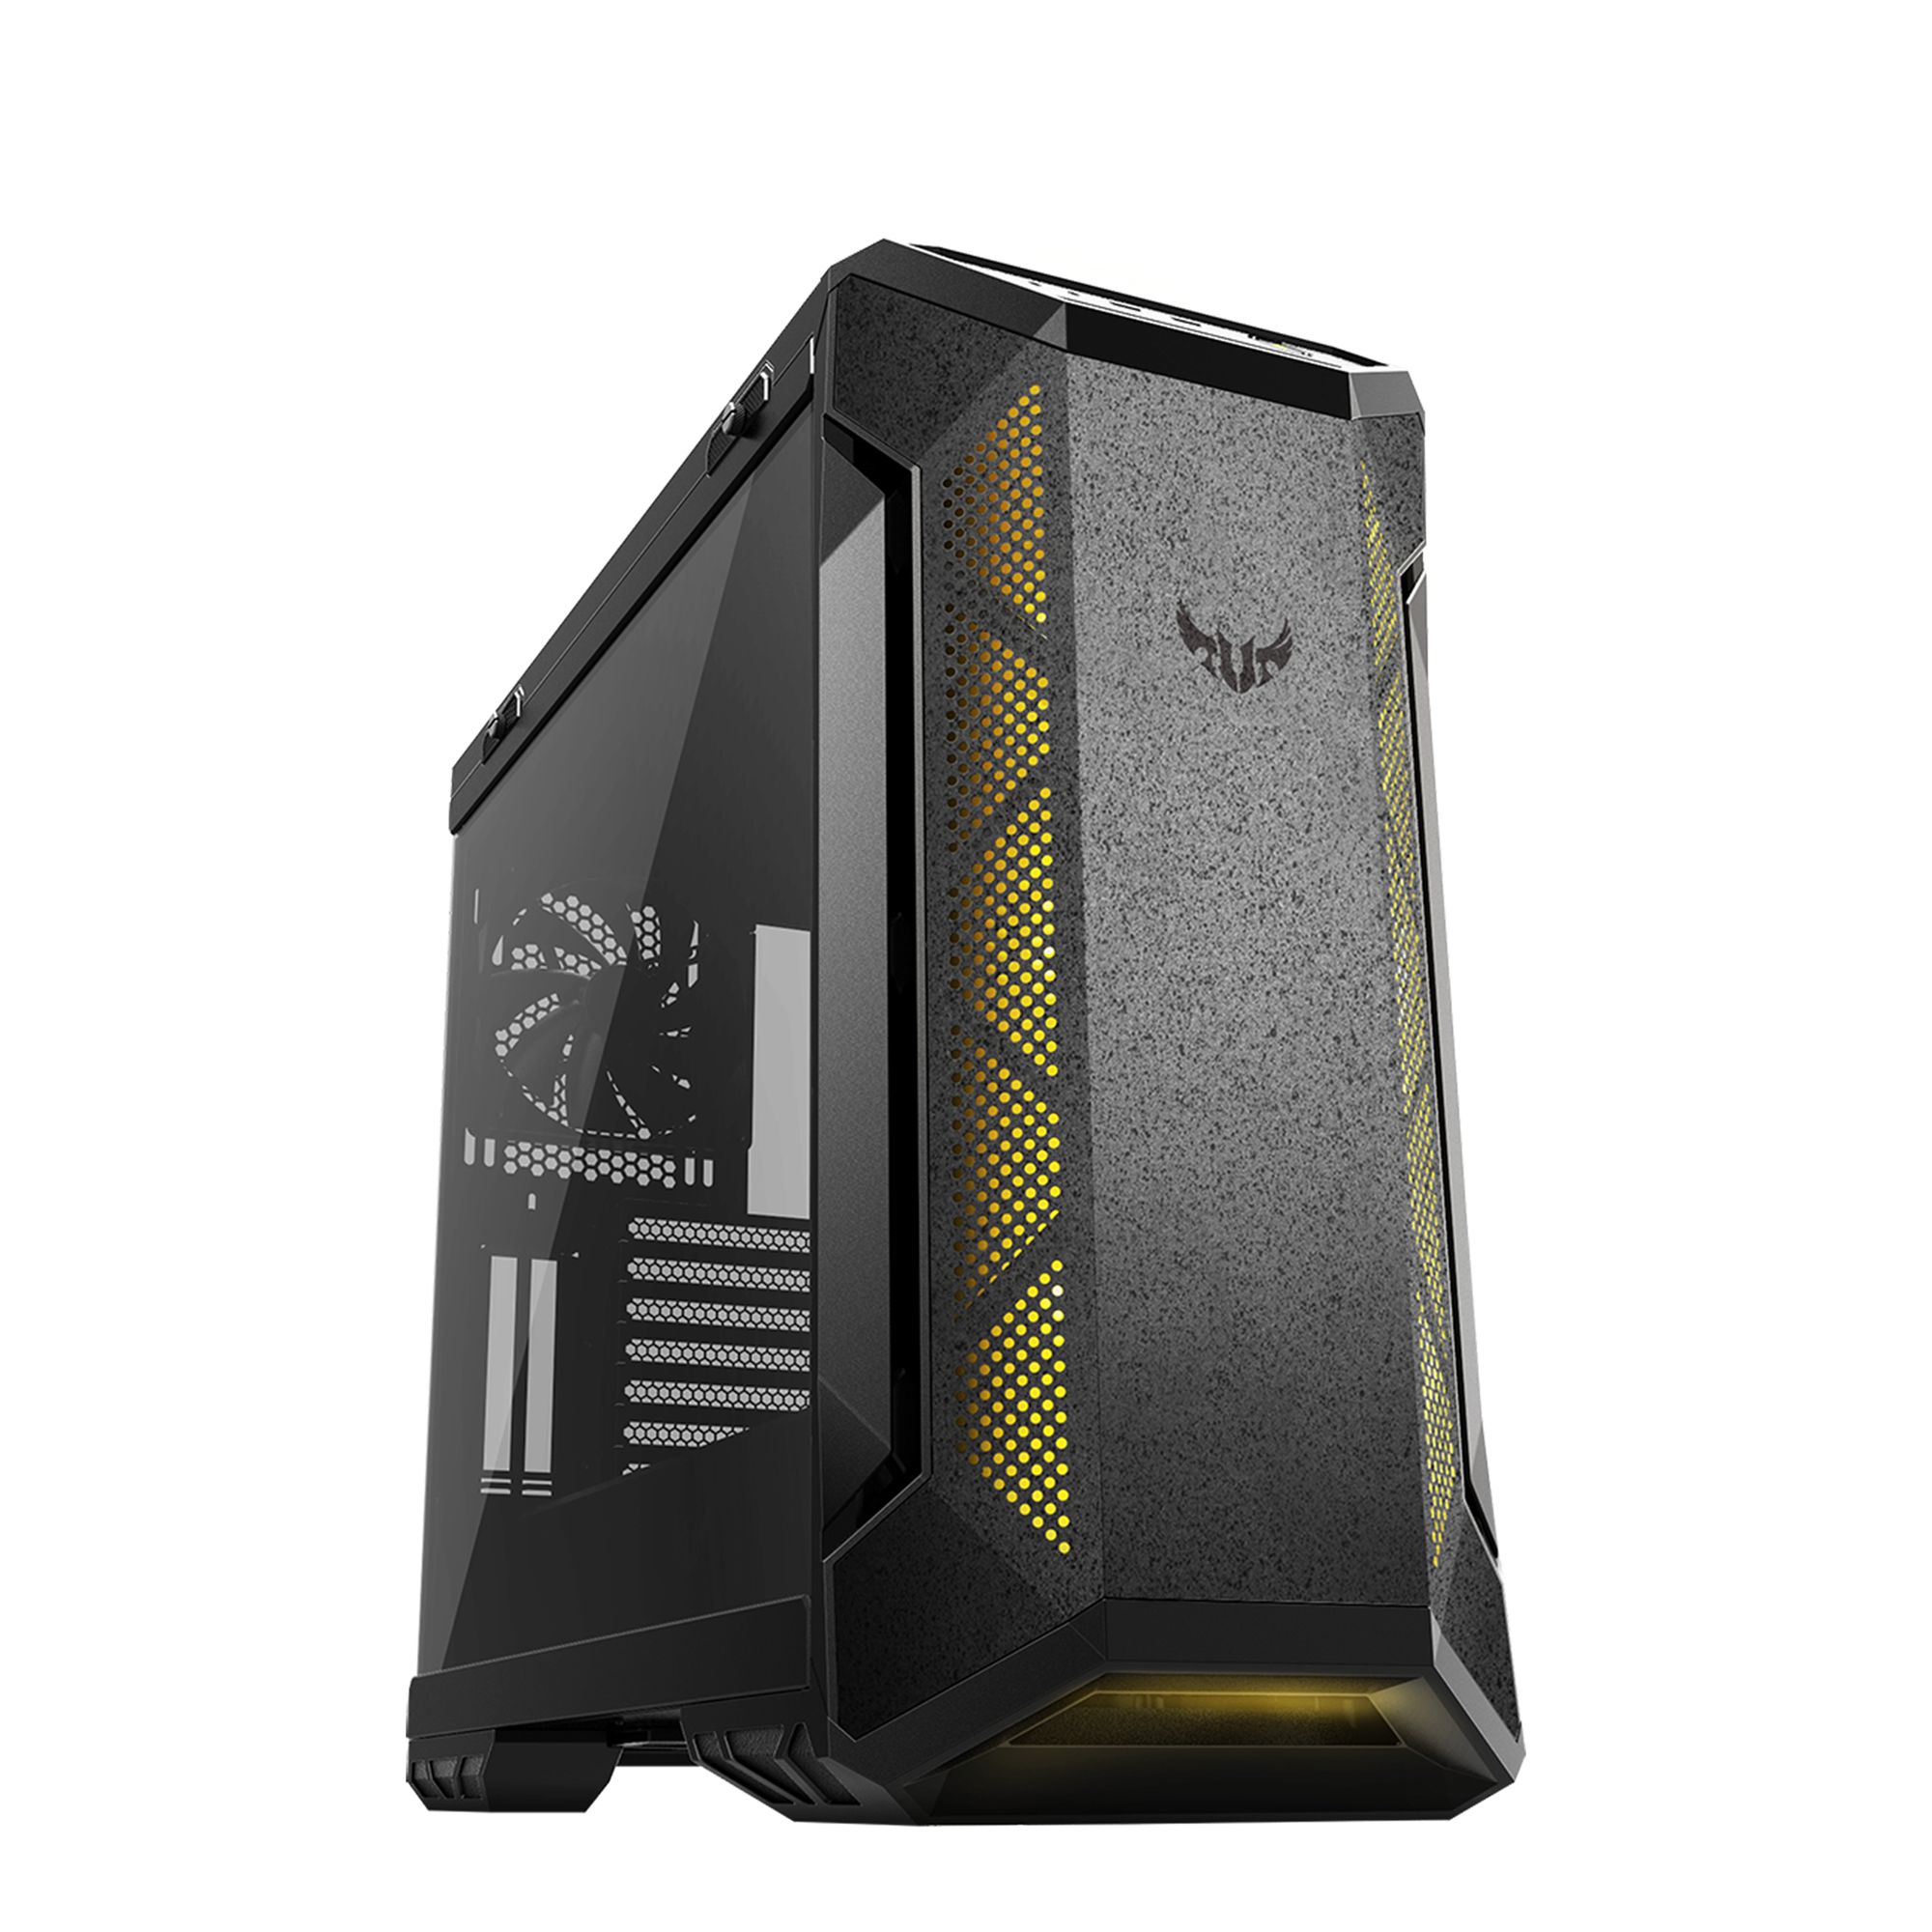 TUF Gaming GT501 d'Asus, le test complet - GinjFo